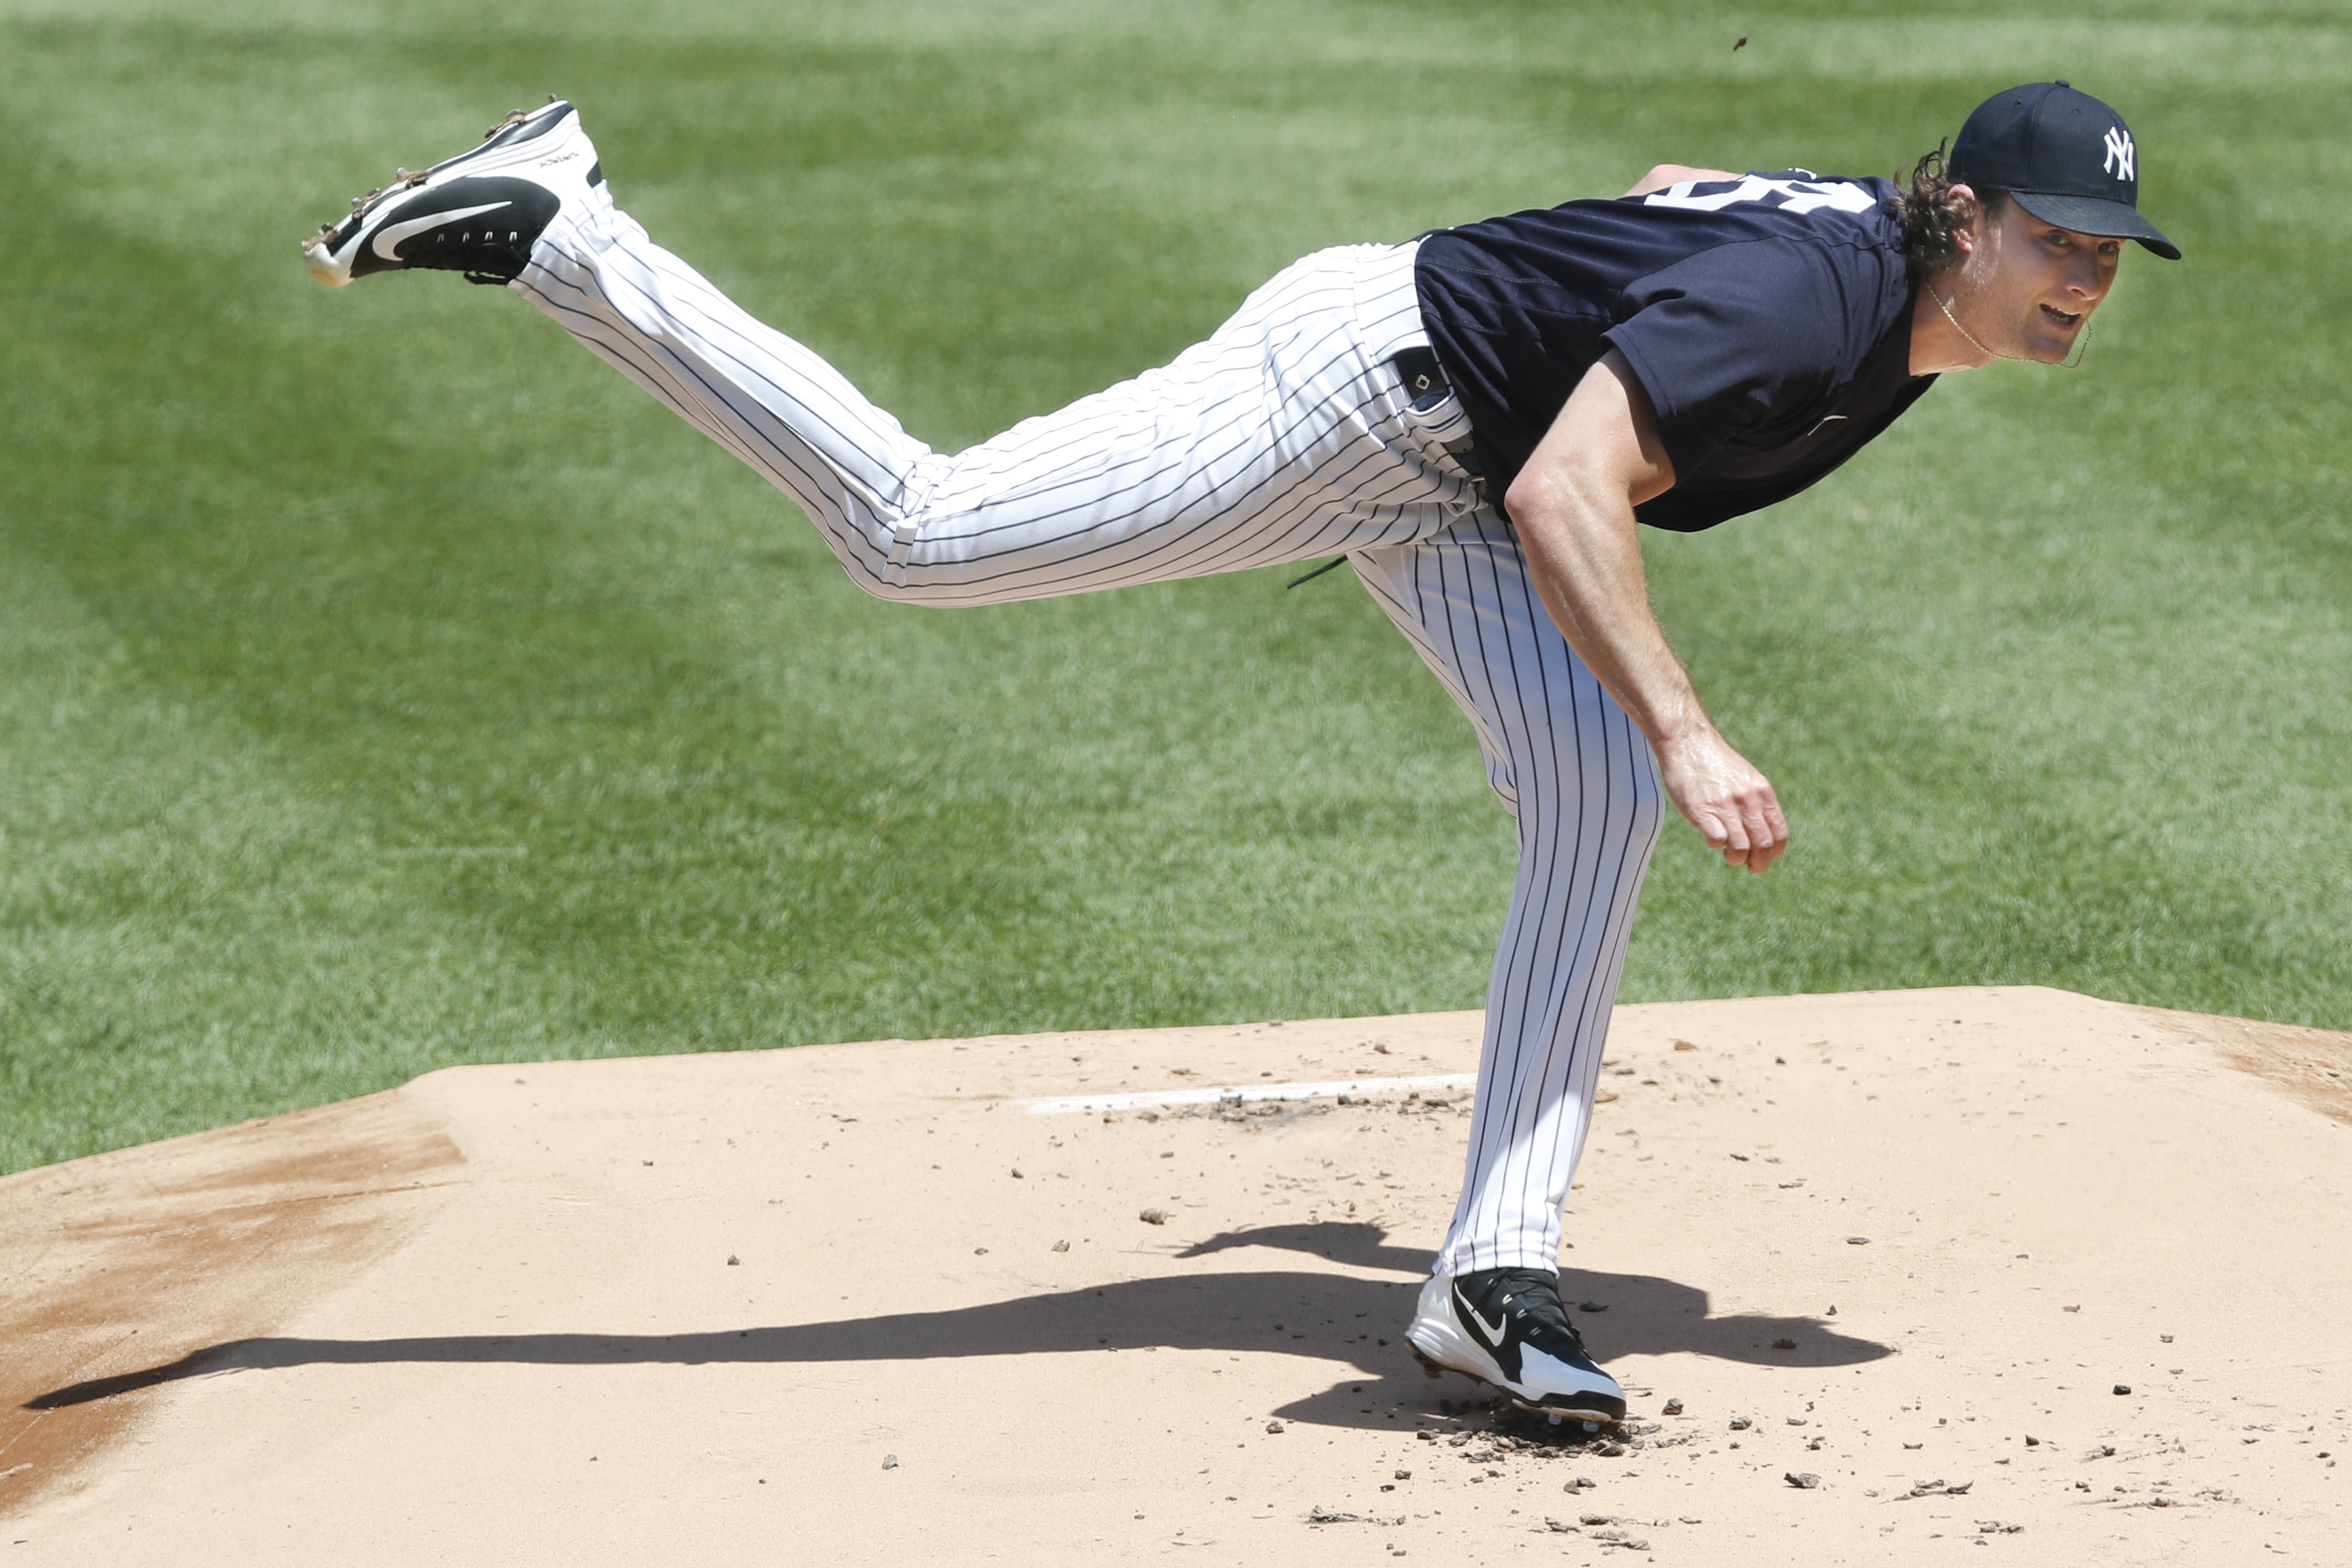 Gerrit Cole & recorded fans tune up for Yankees debuts